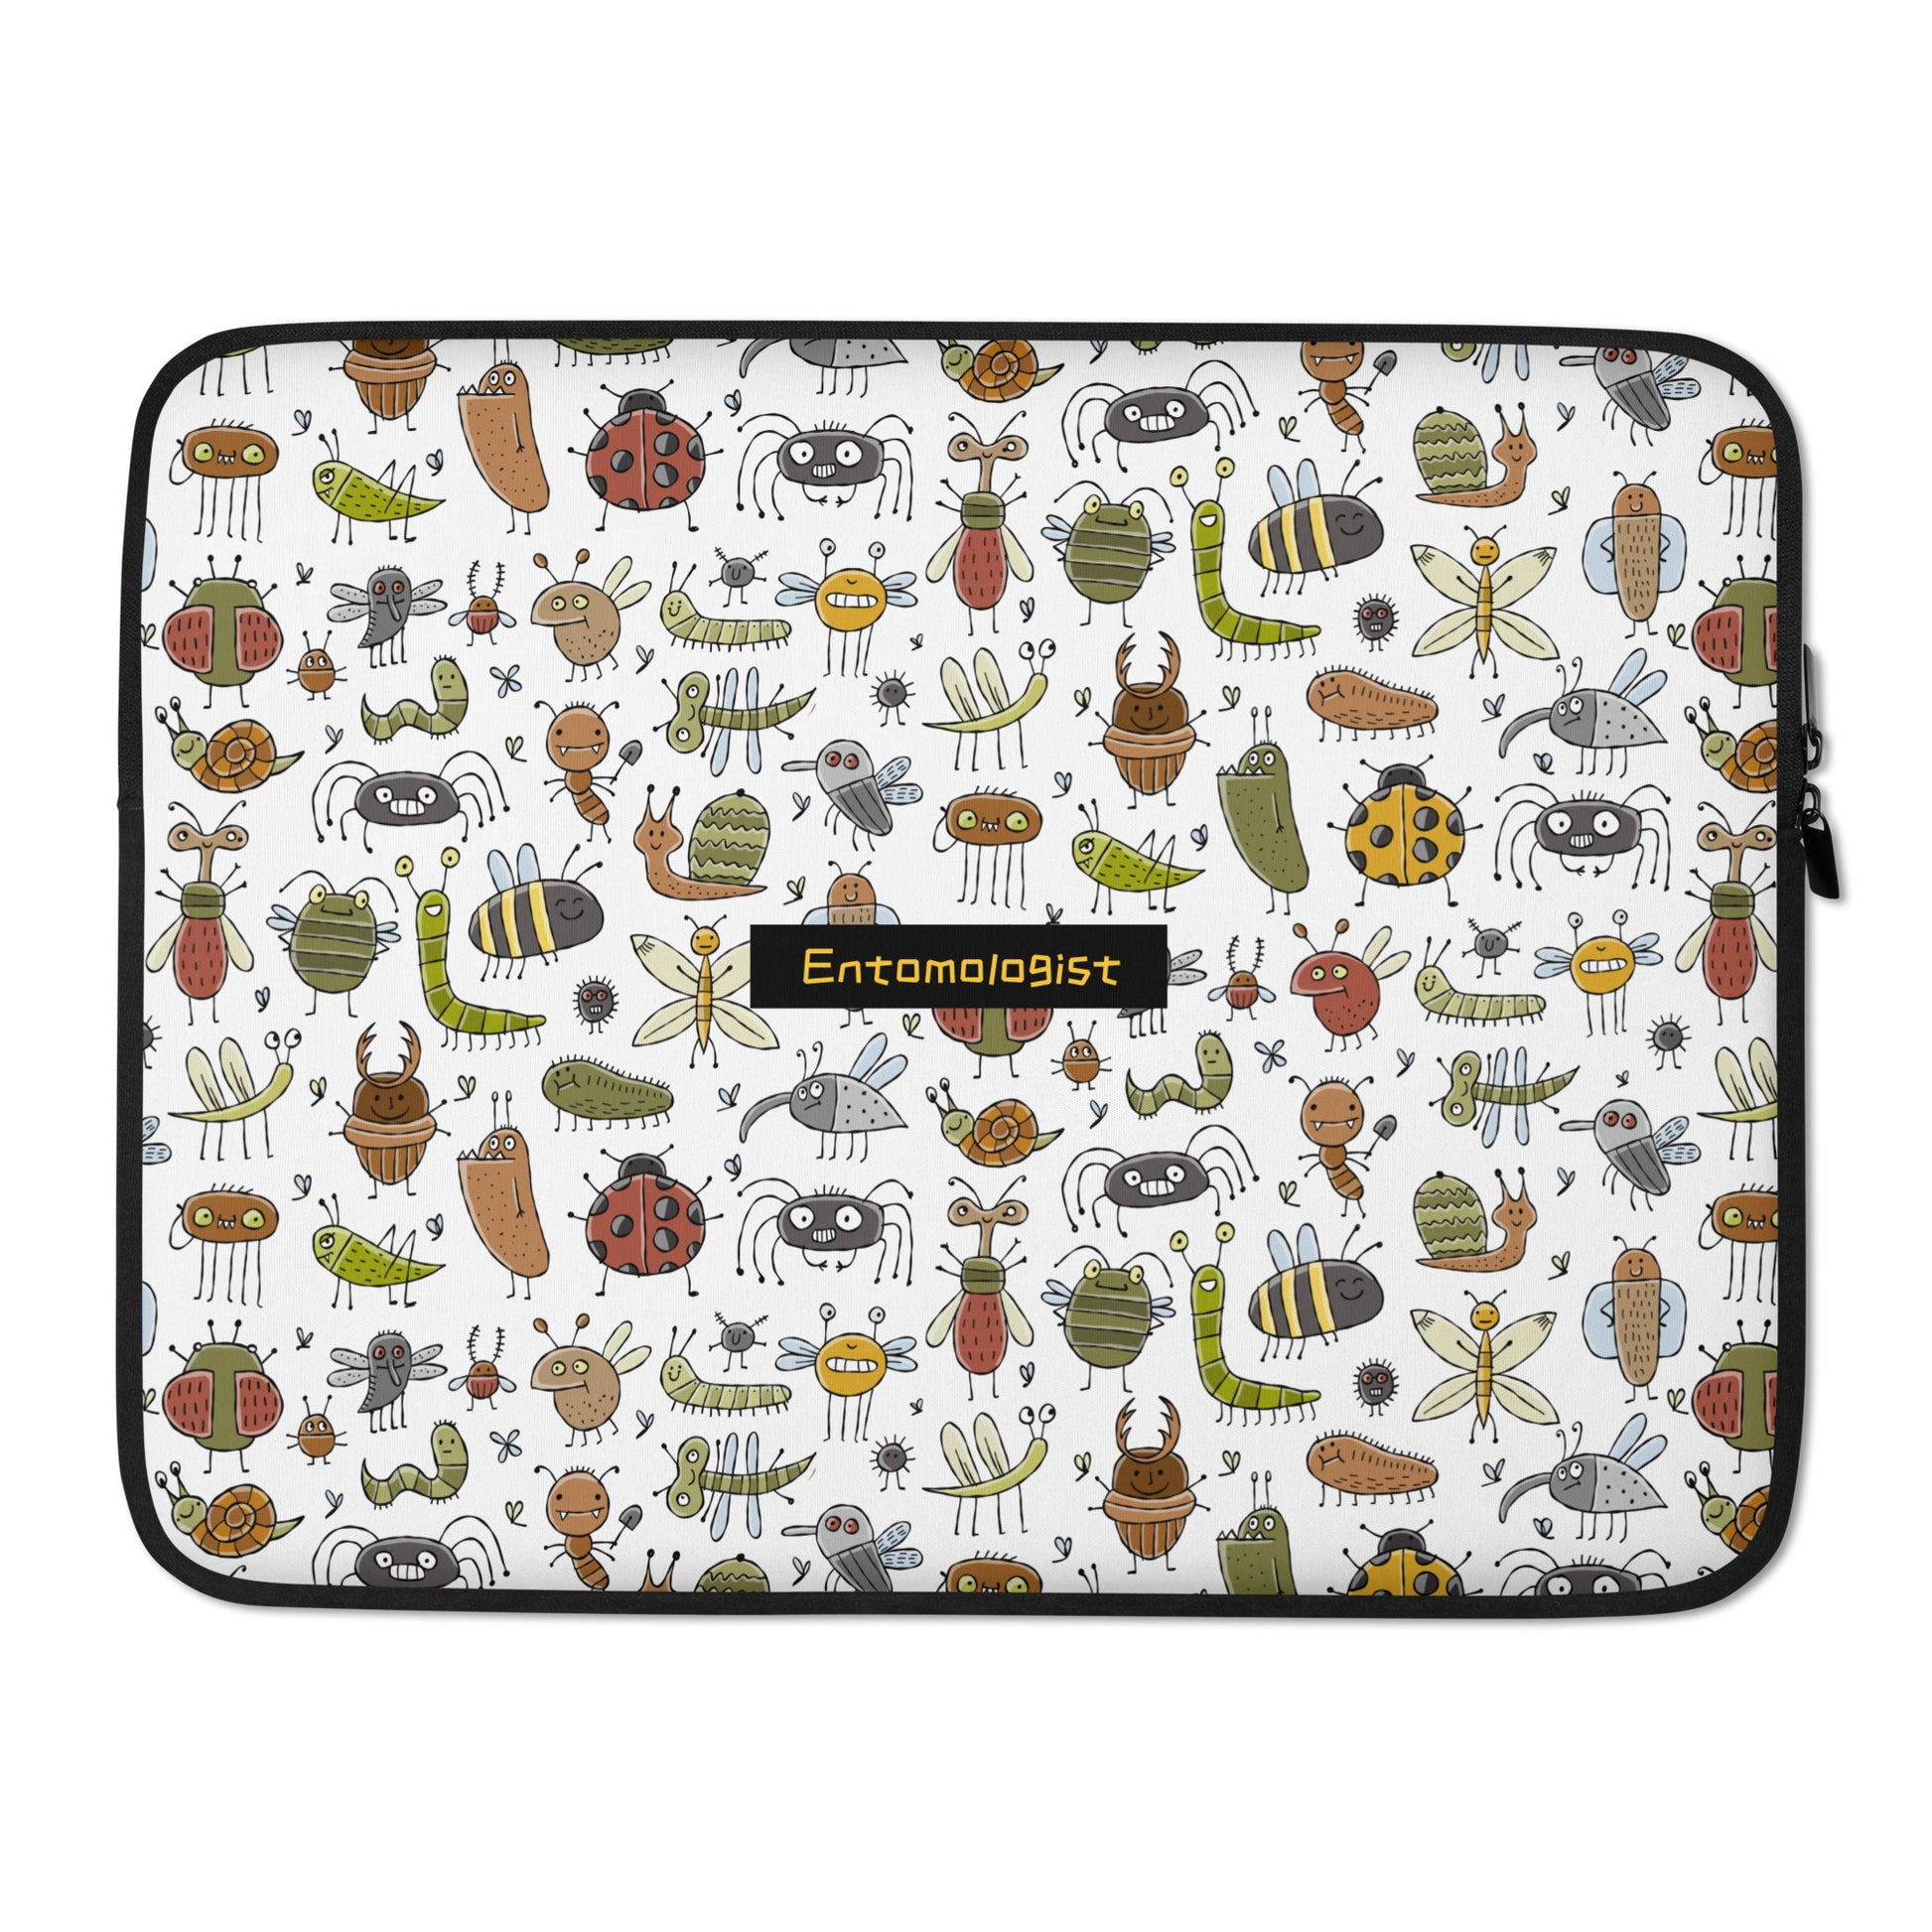 Entomologist Laptop Case 15 with funny insects collection